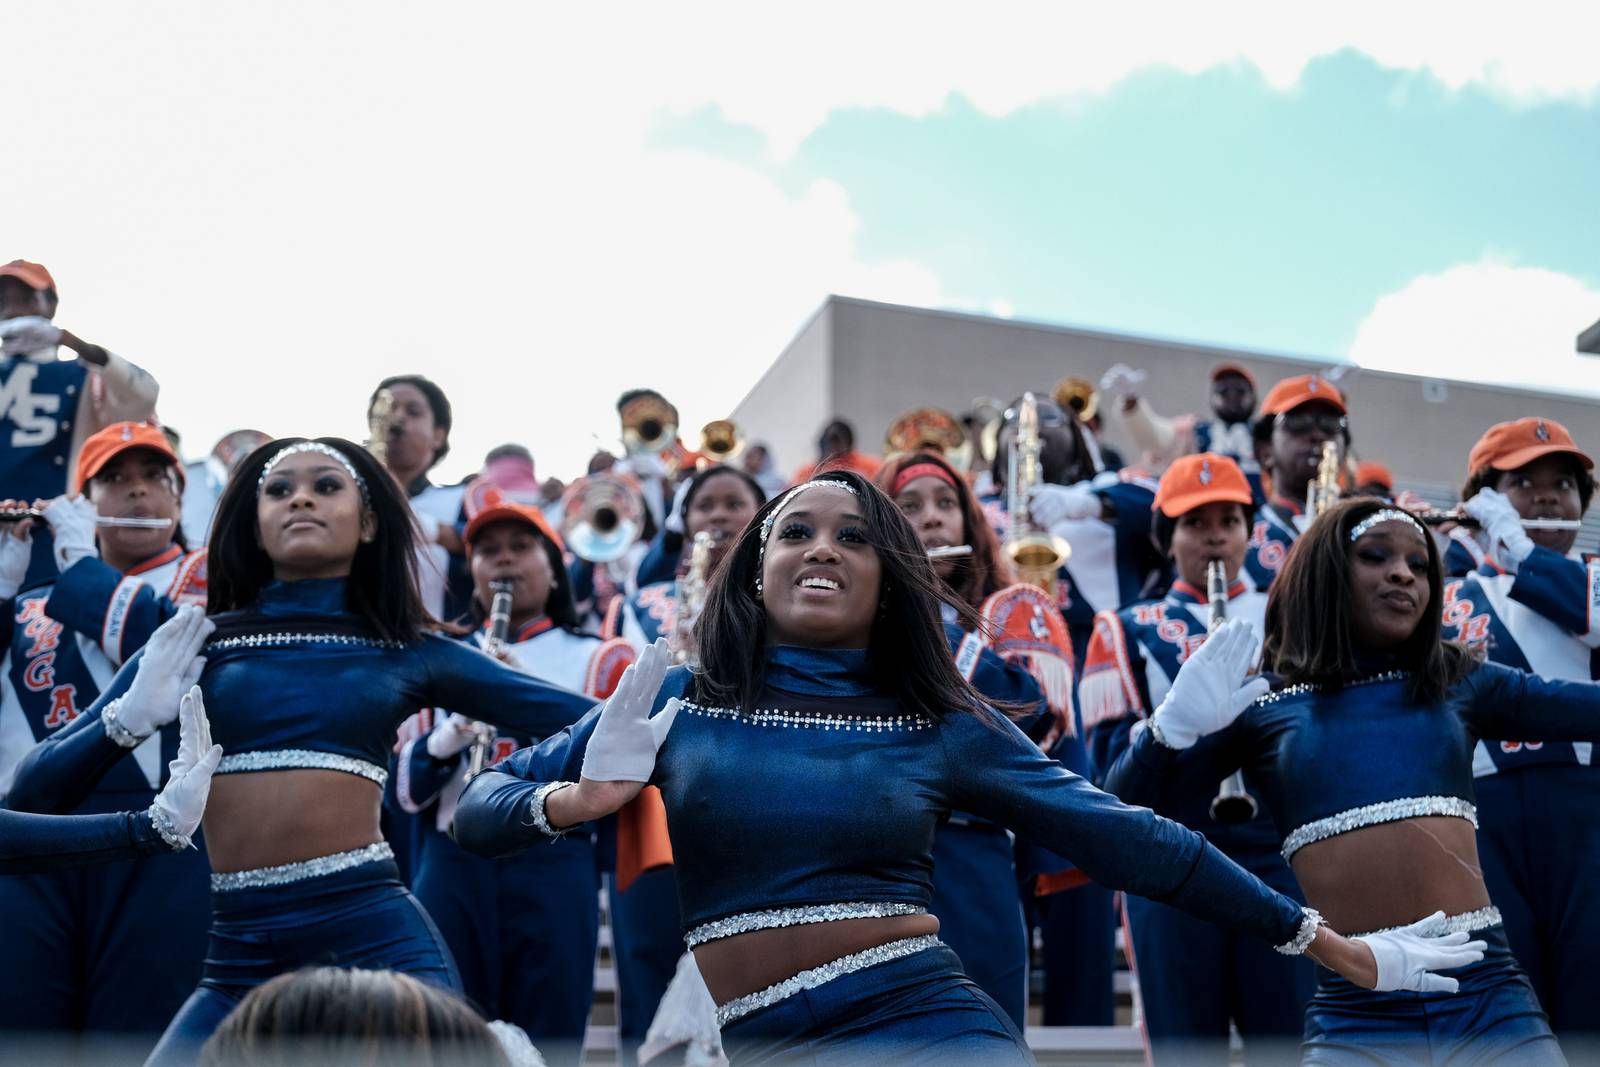 at State University, other HBCUs is a cultural